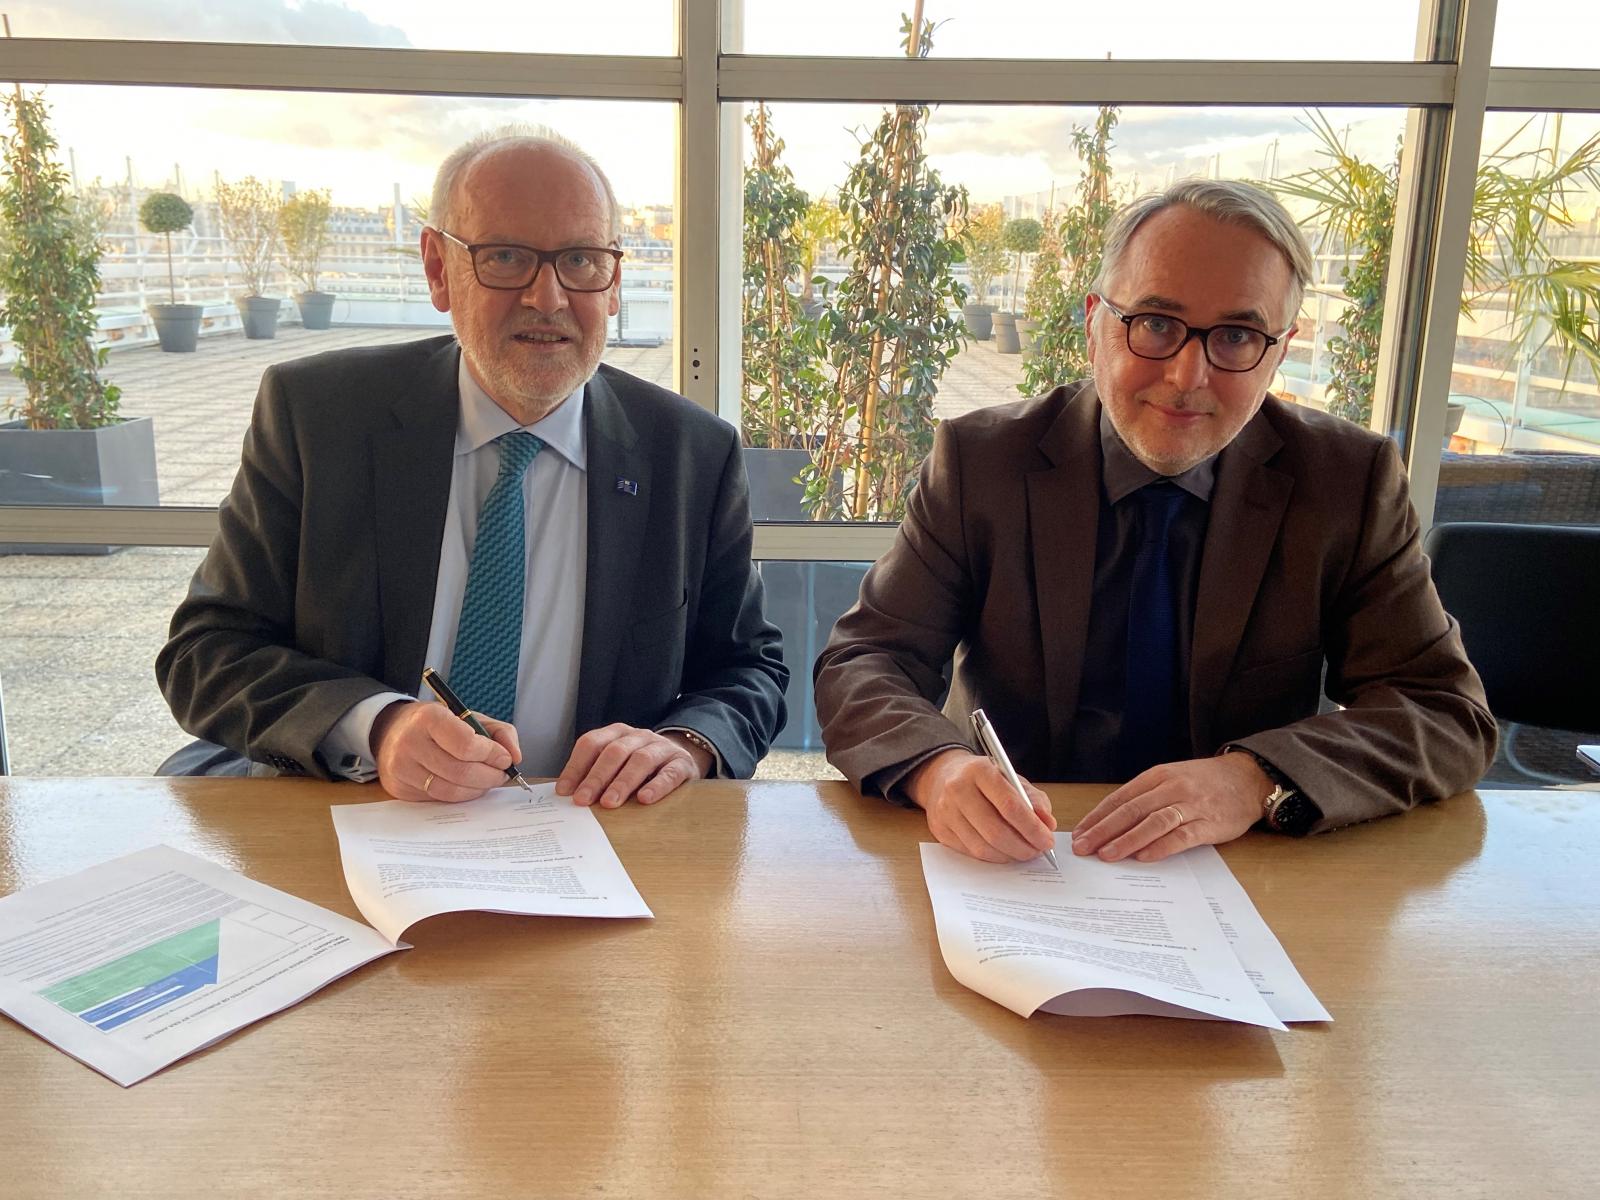 The European Union Agency for Railways and UIC, the worldwide railway organisation, have signed a coordination framework